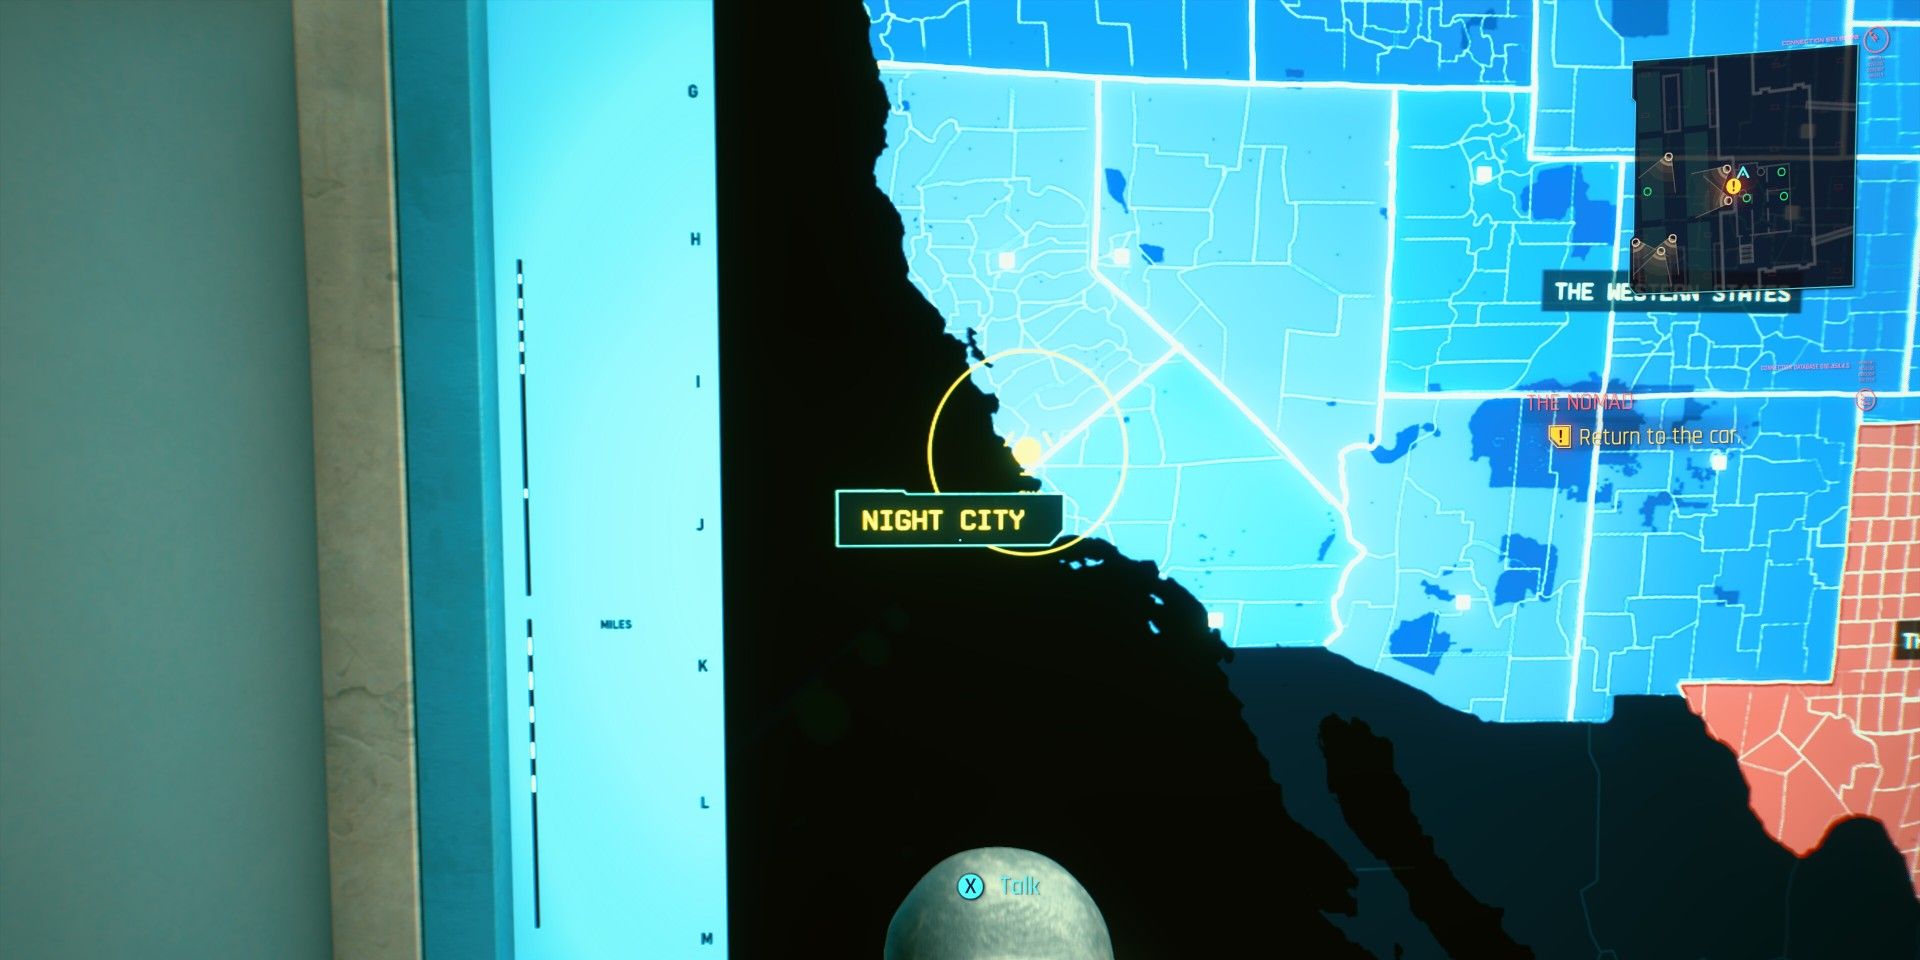 The location of Night City on an in-game map in Cyberpunk 2077